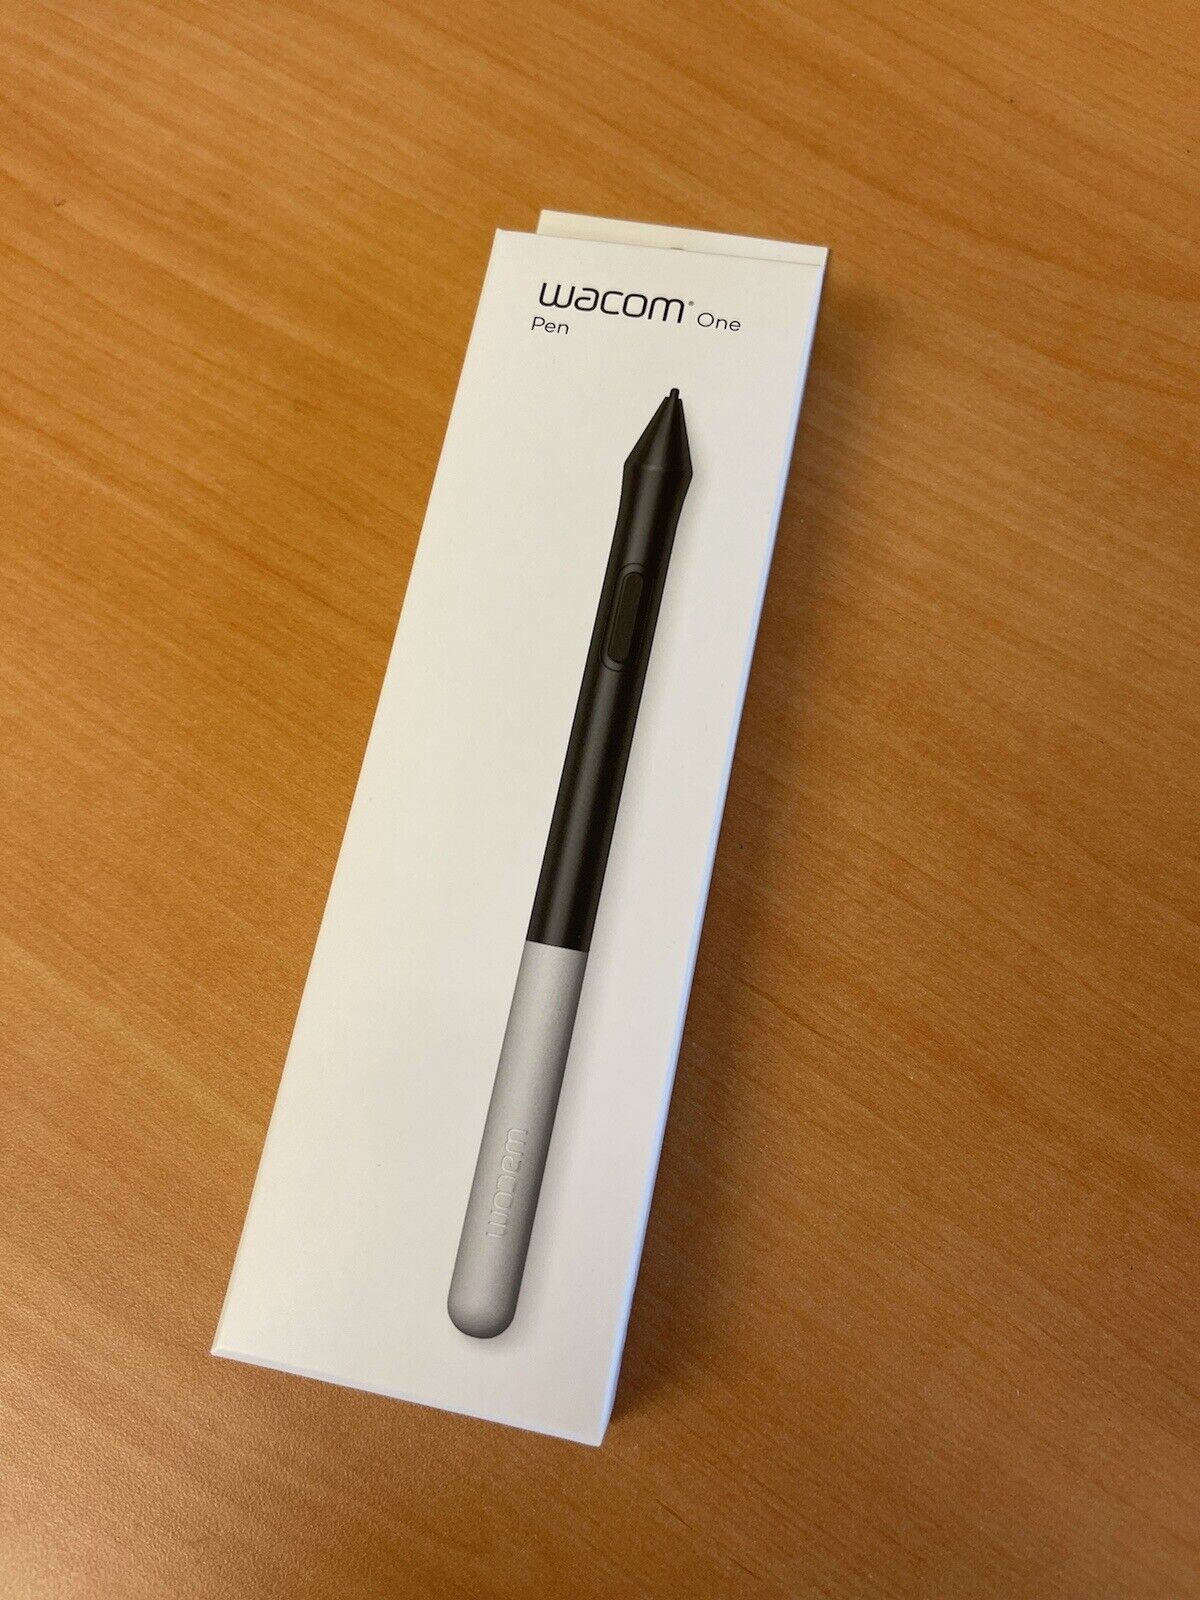 NEW Wacom One Pen For Creative Pen Display DTC133 CP91300B2Z - 